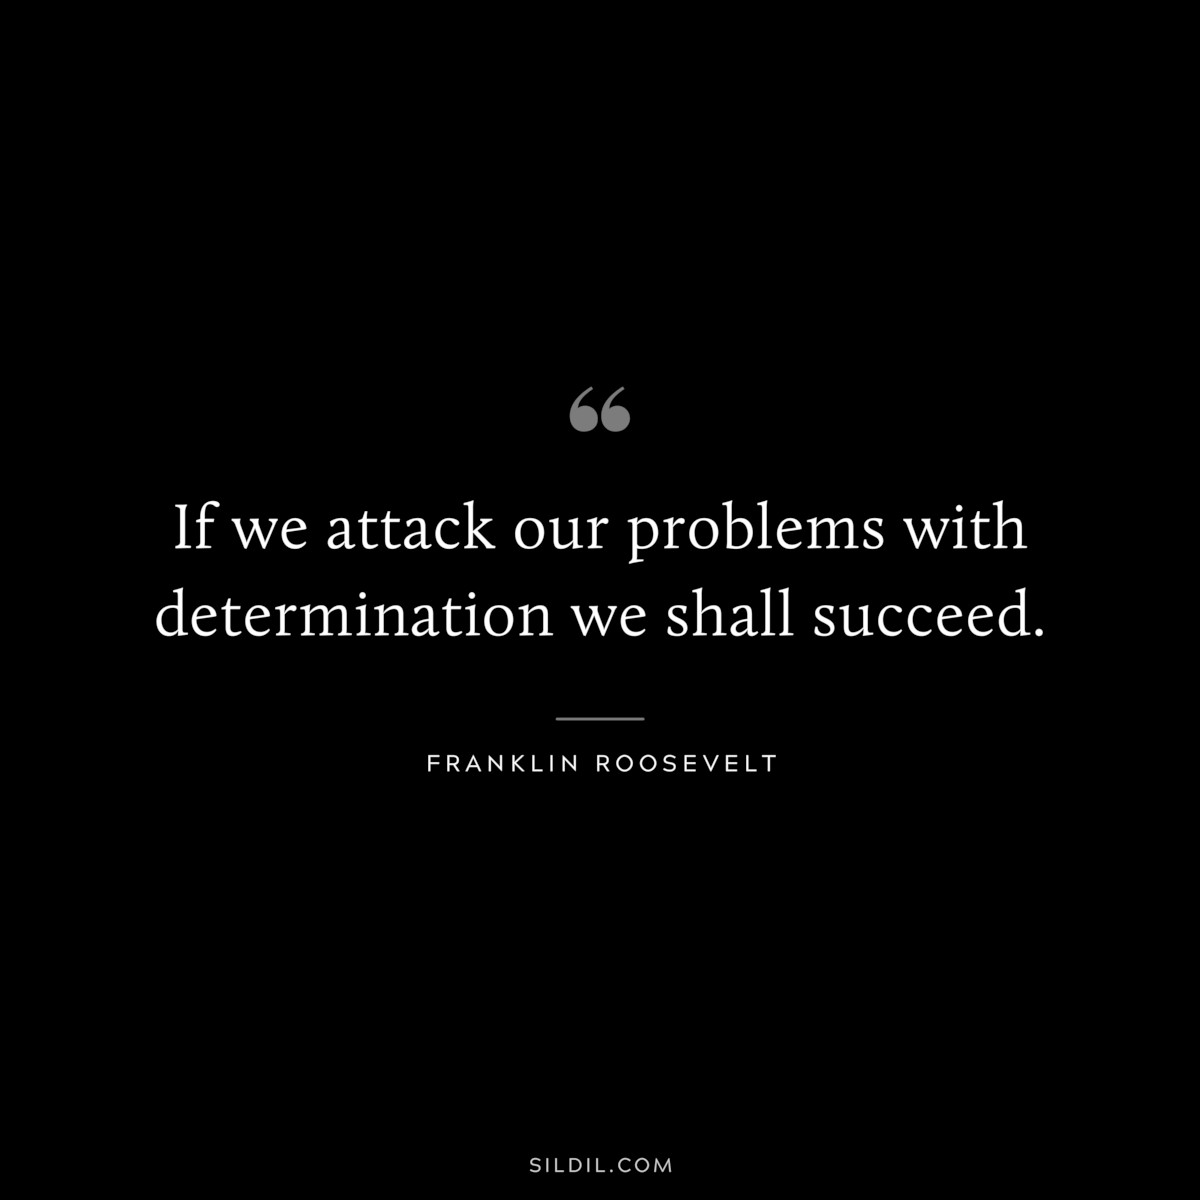 If we attack our problems with determination we shall succeed. ― Franklin Roosevelt